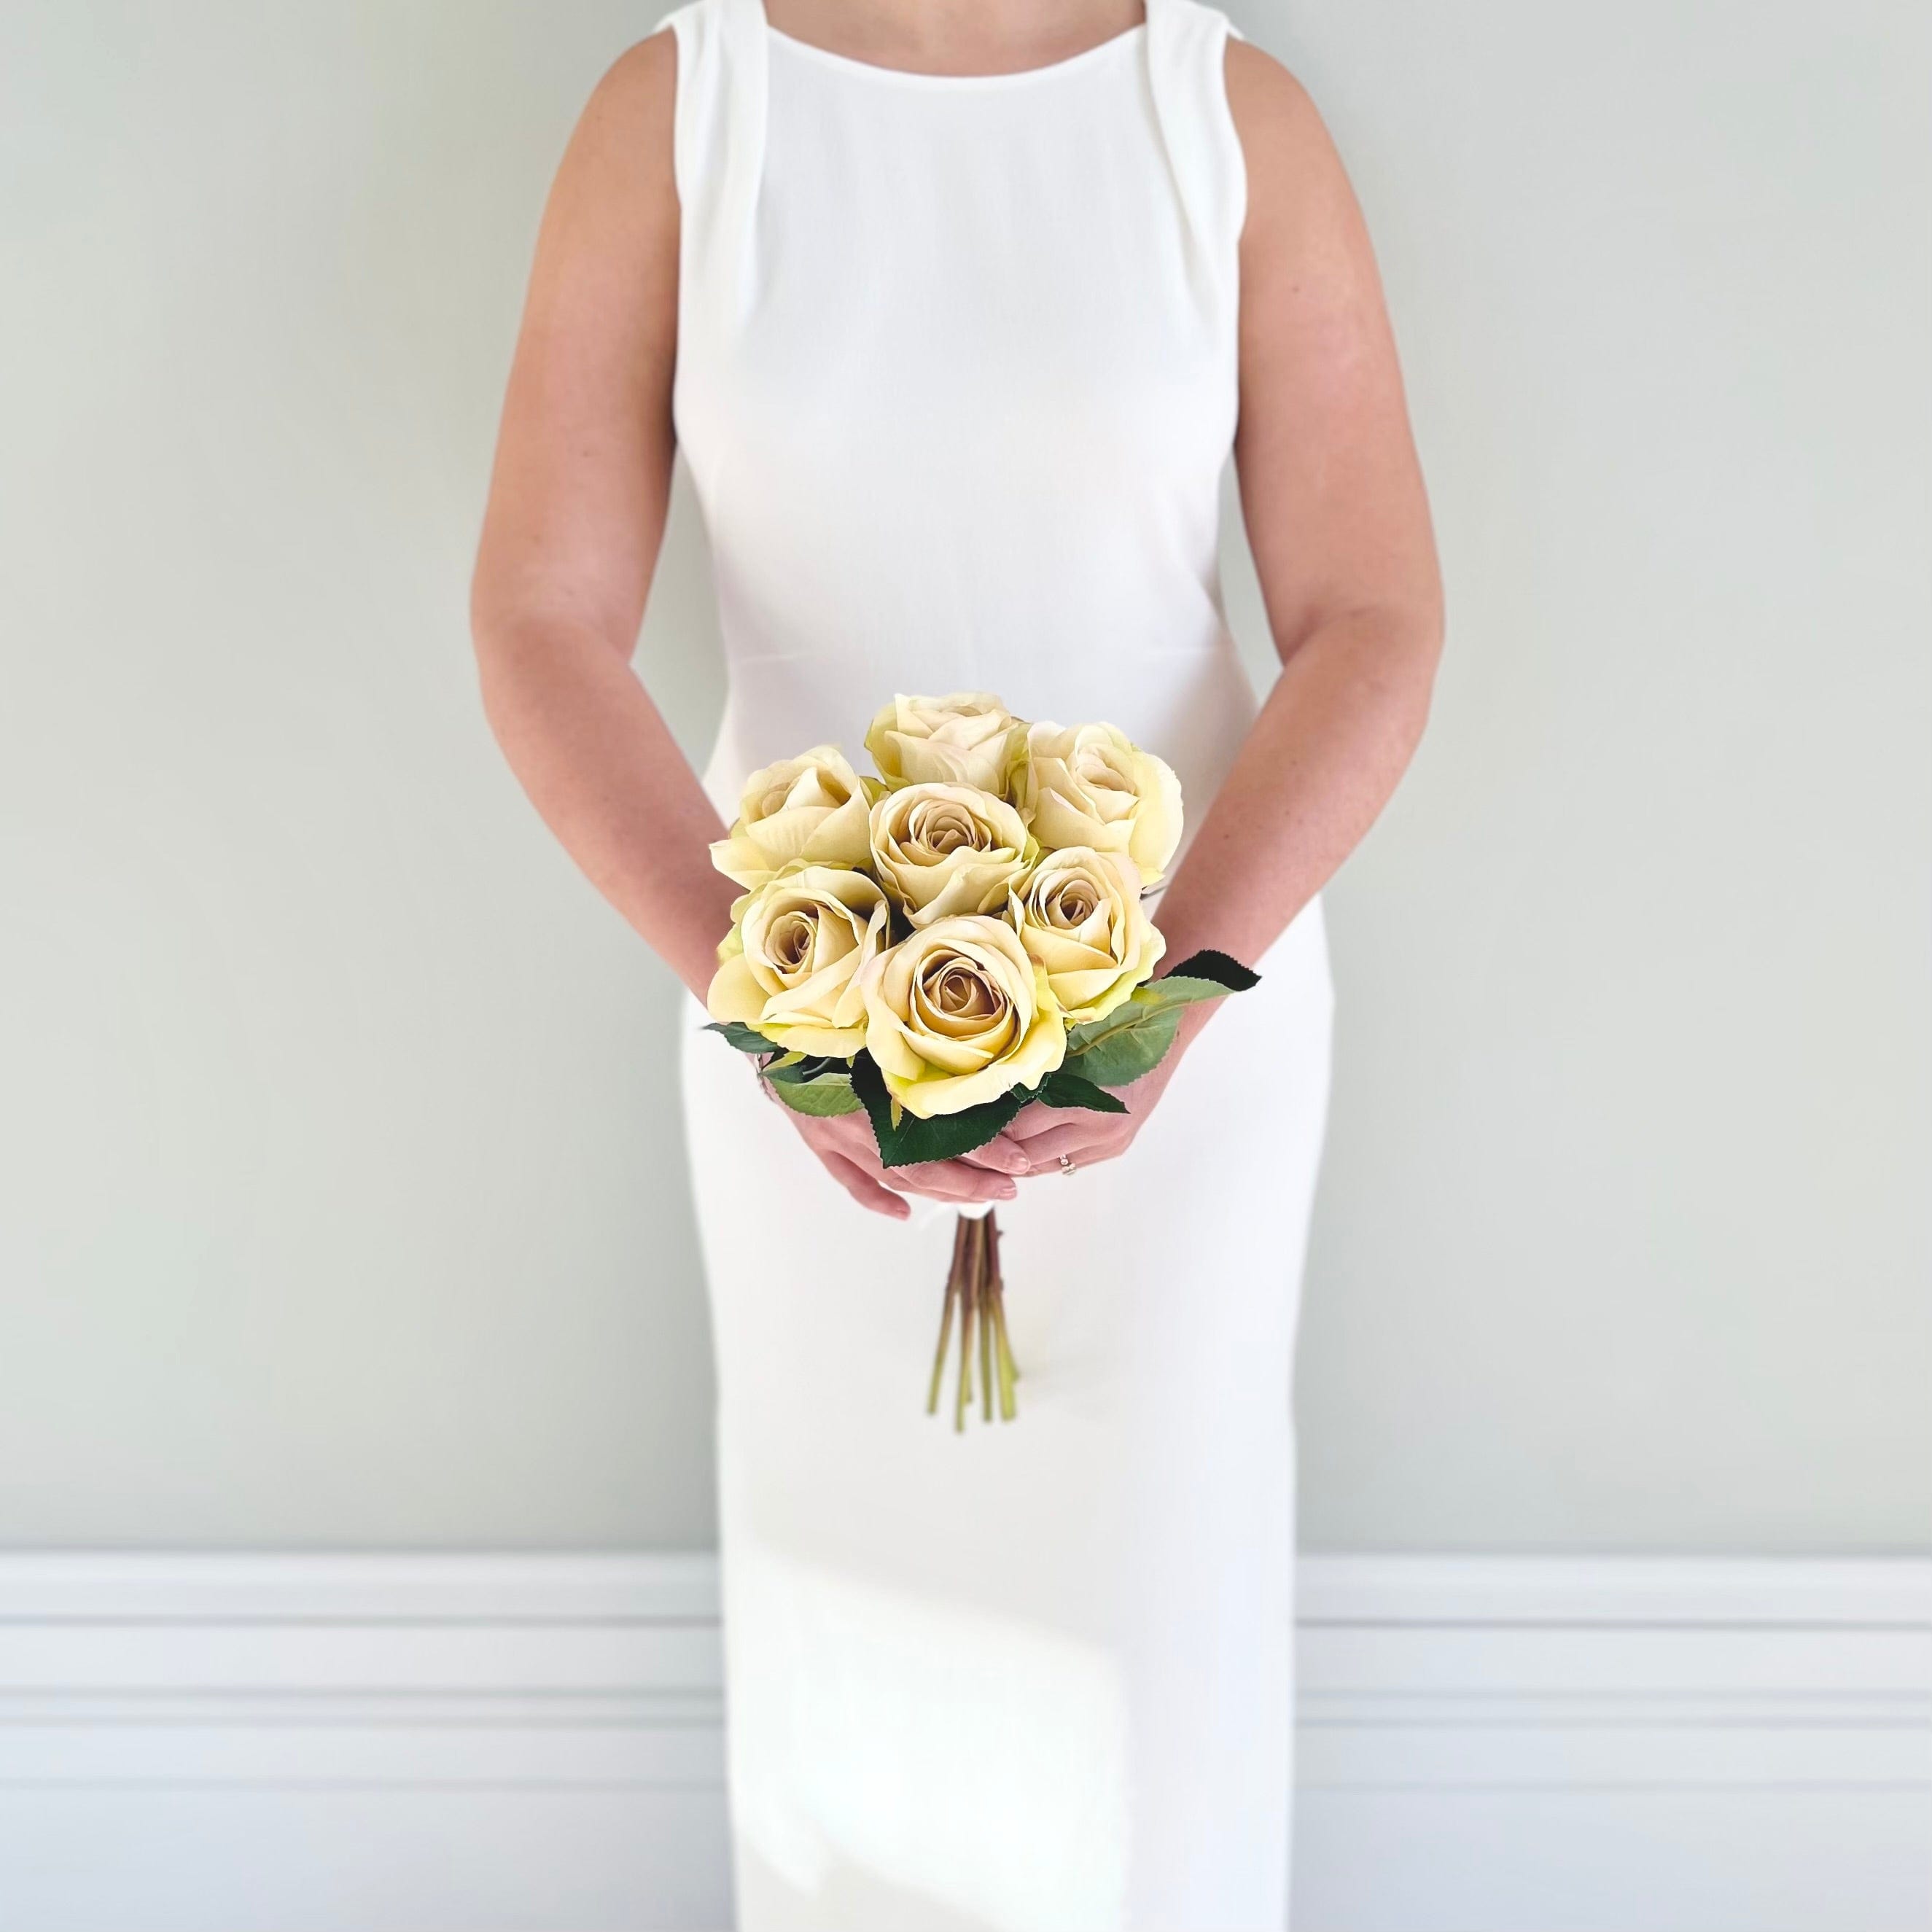 Artificial flowers luxury faux silk cream rose wedding bridesmaid bouquet lifelike realistic faux flowers from Amaranthine Blooms UK